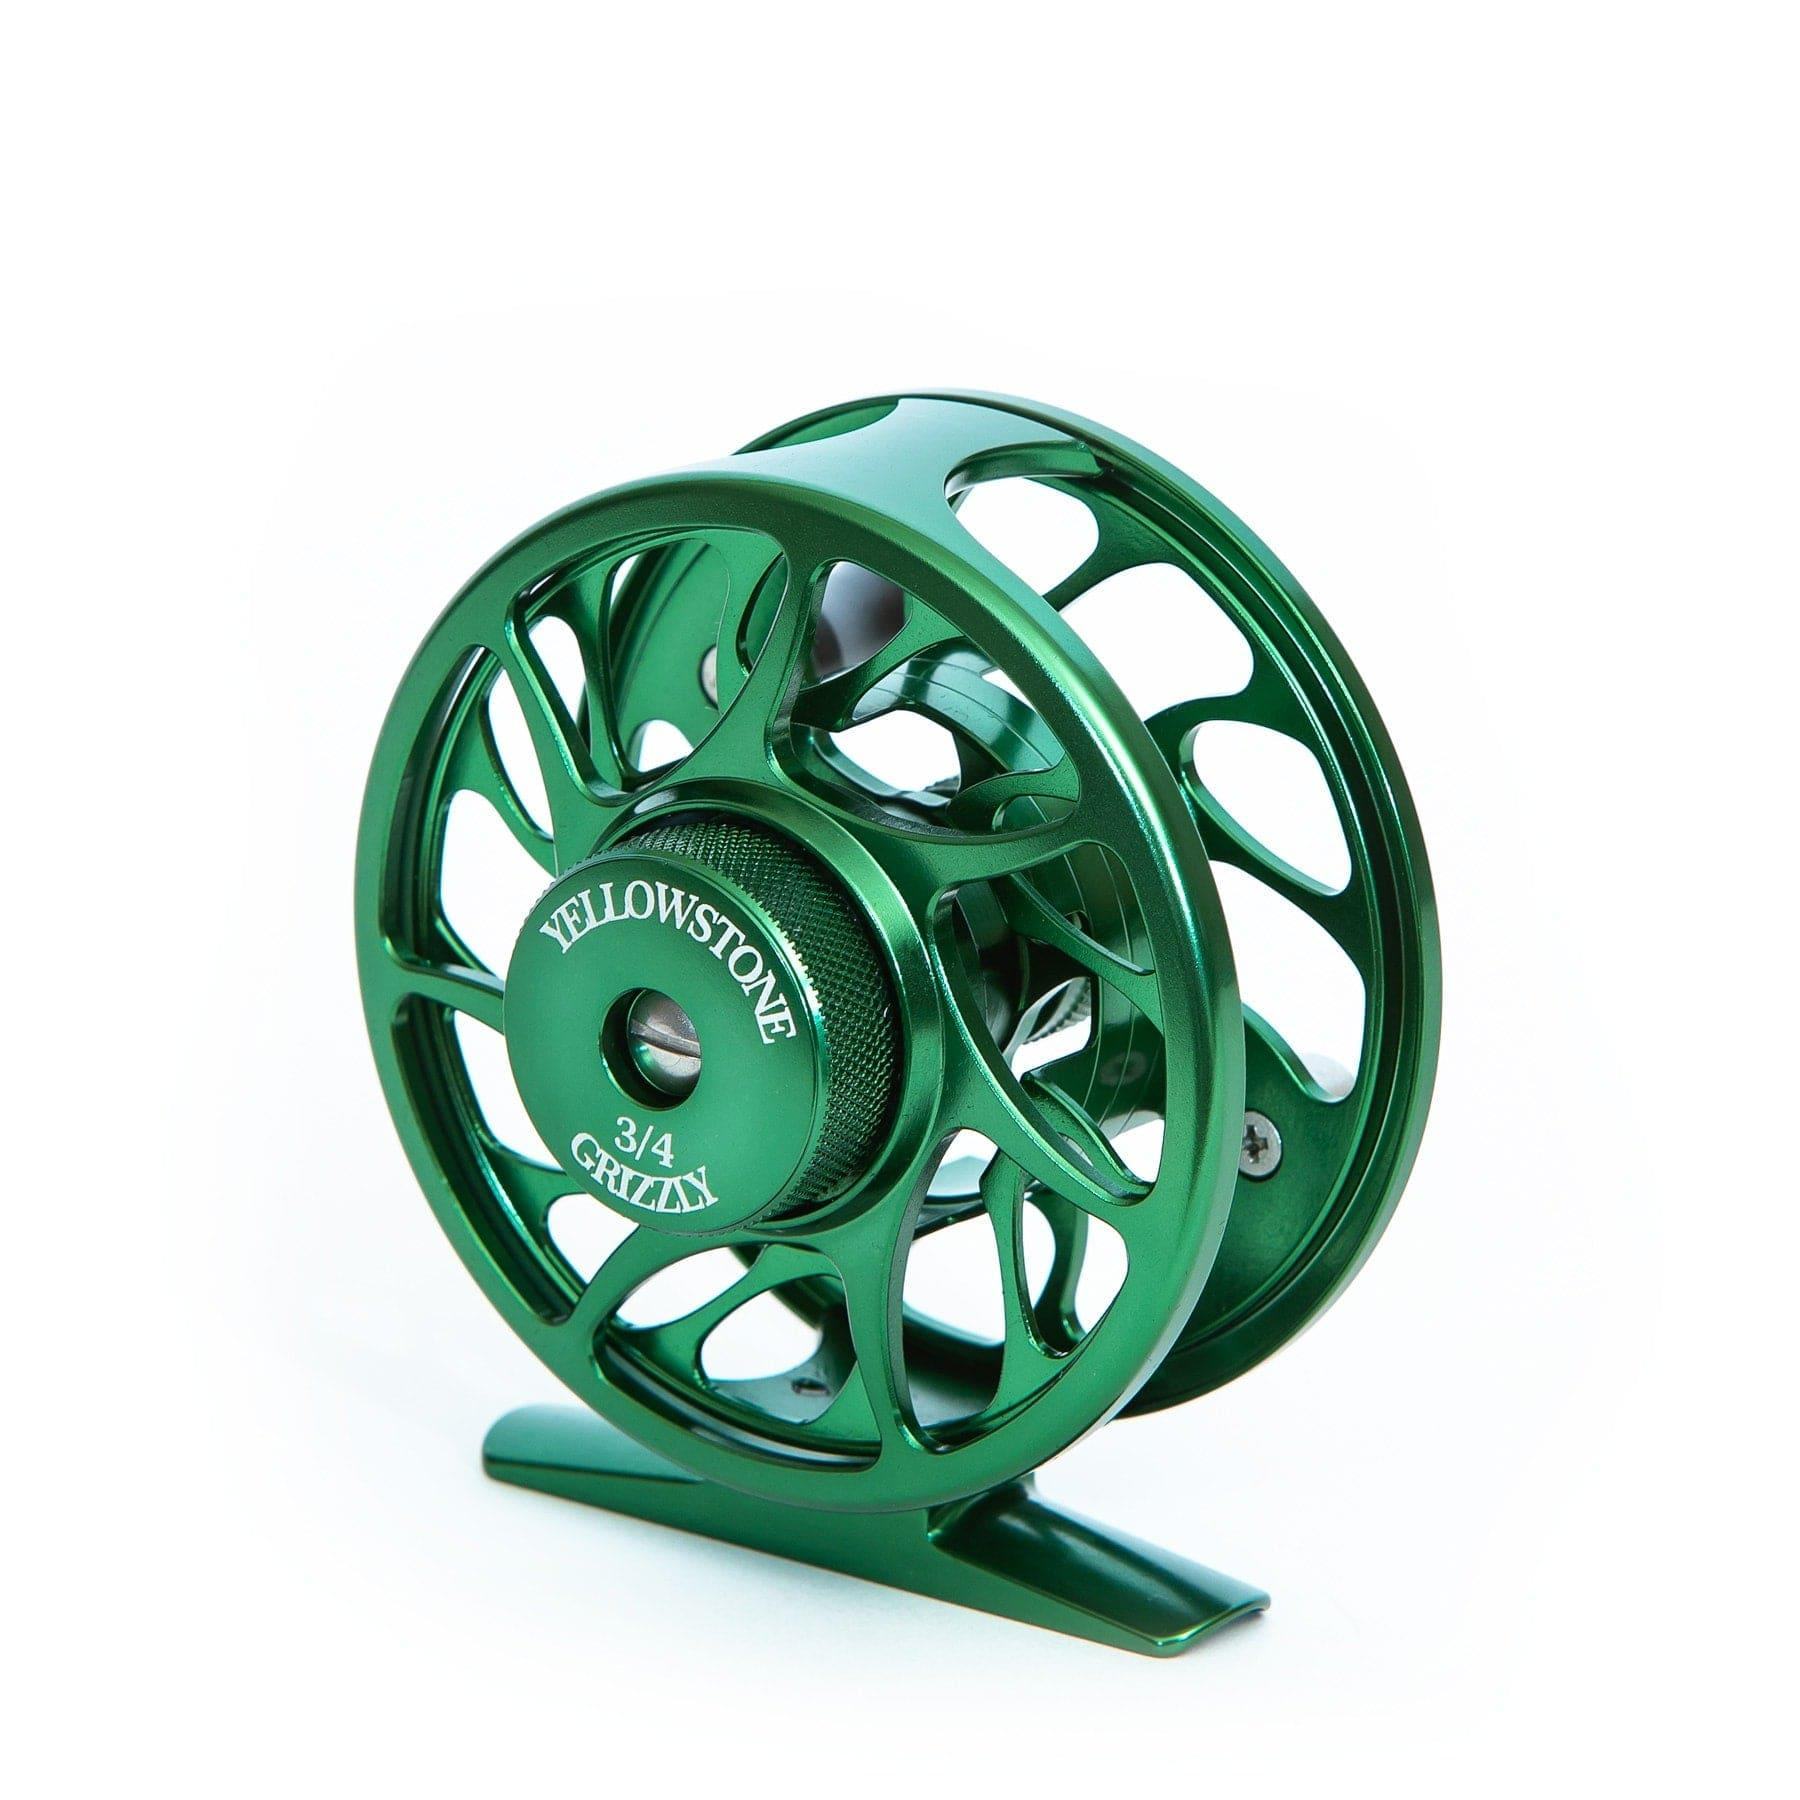 Yellowstone Grizzly Fly Reel - 5/6wt / Green